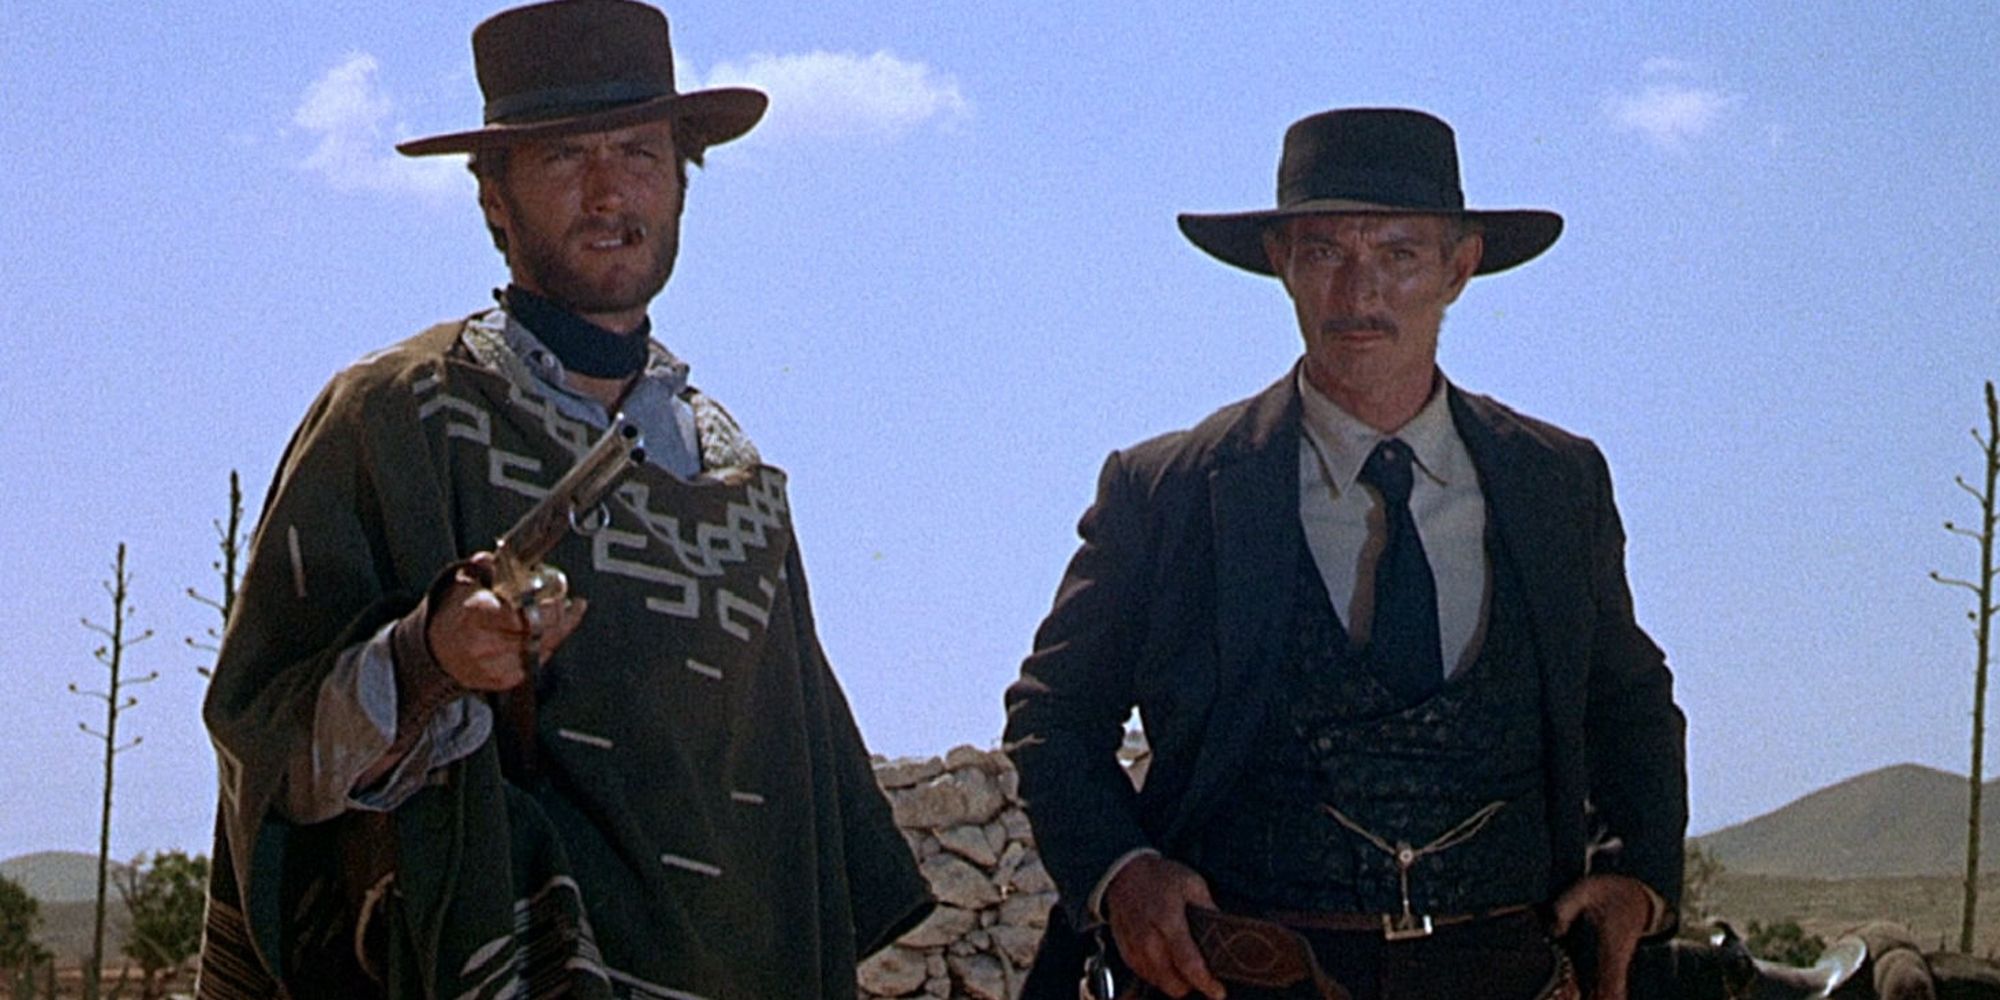 Clint Eastwood and Lee Van Cleef in For a Few Dollars More